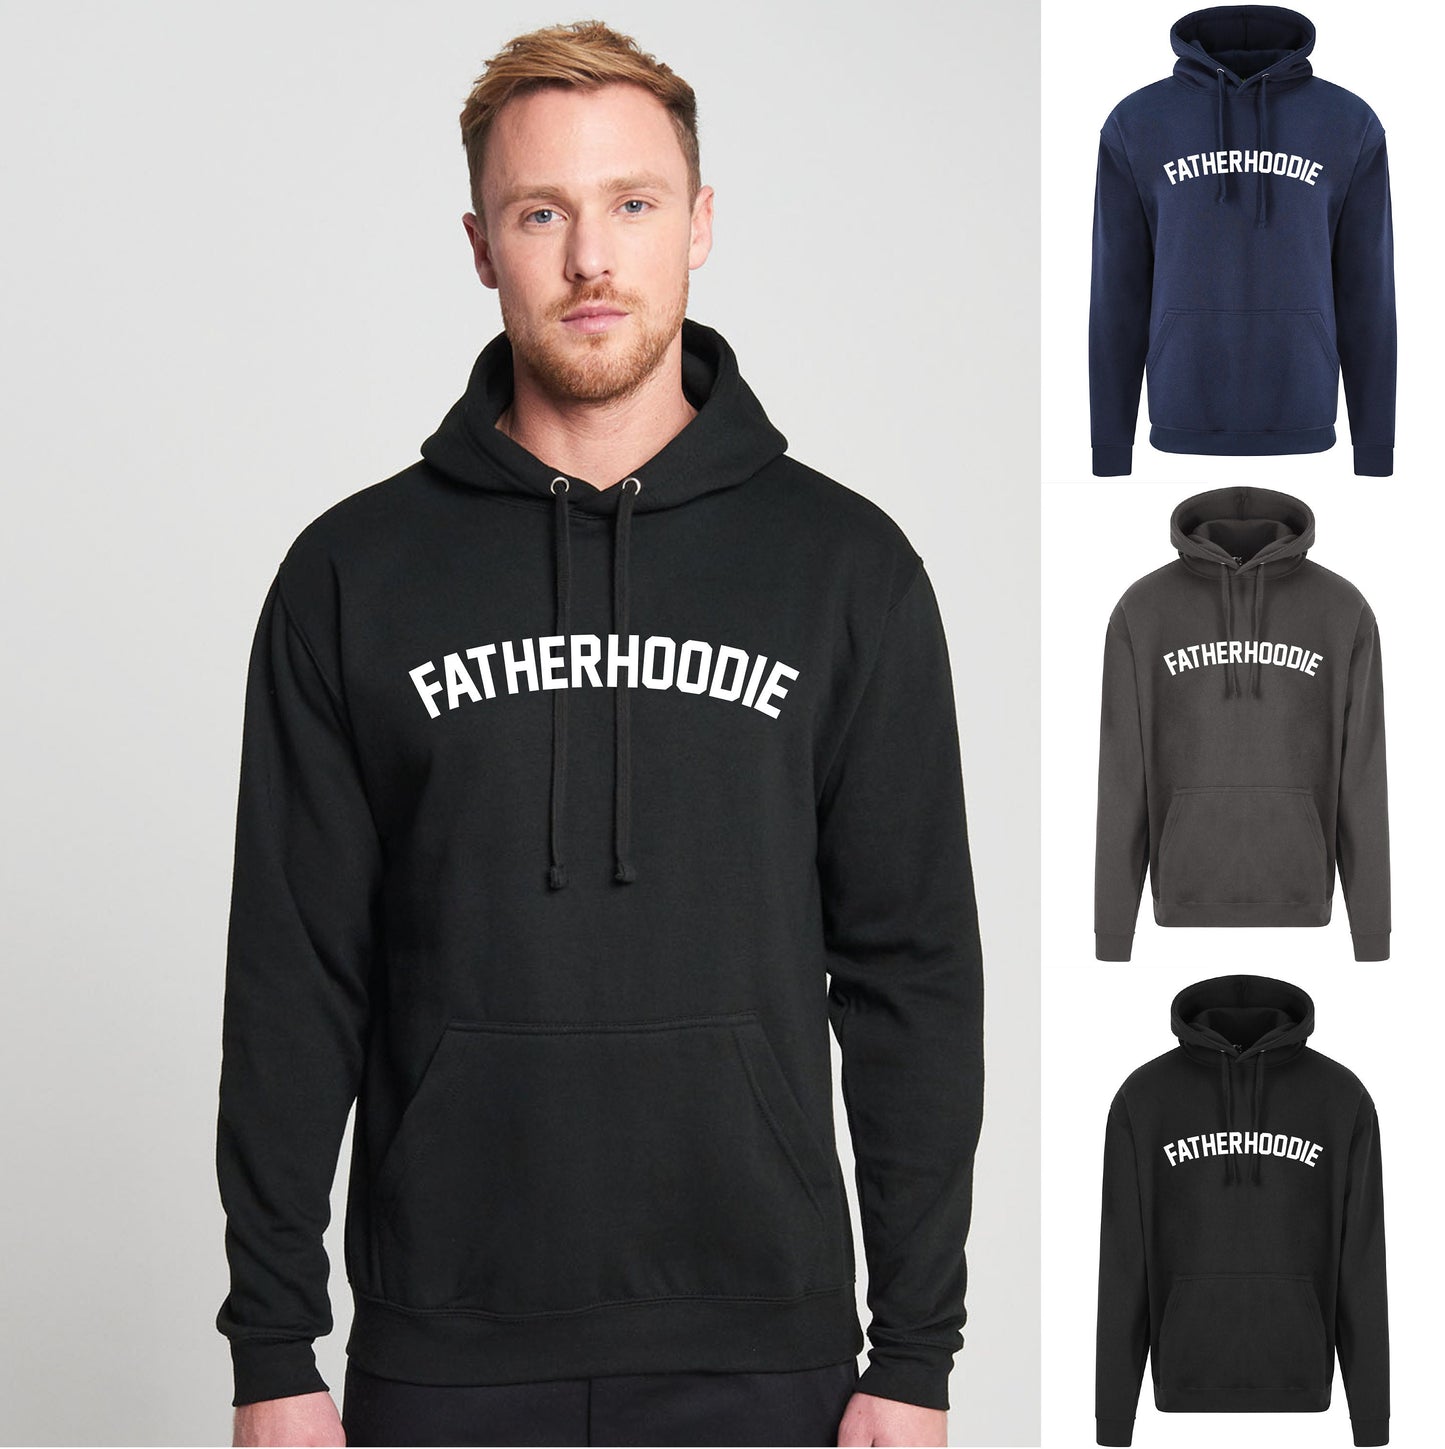 Fatherhoodie RX350 Hoodie - Gift for Father's Day | Dad Daddy Hooded Top Sweater Jumper